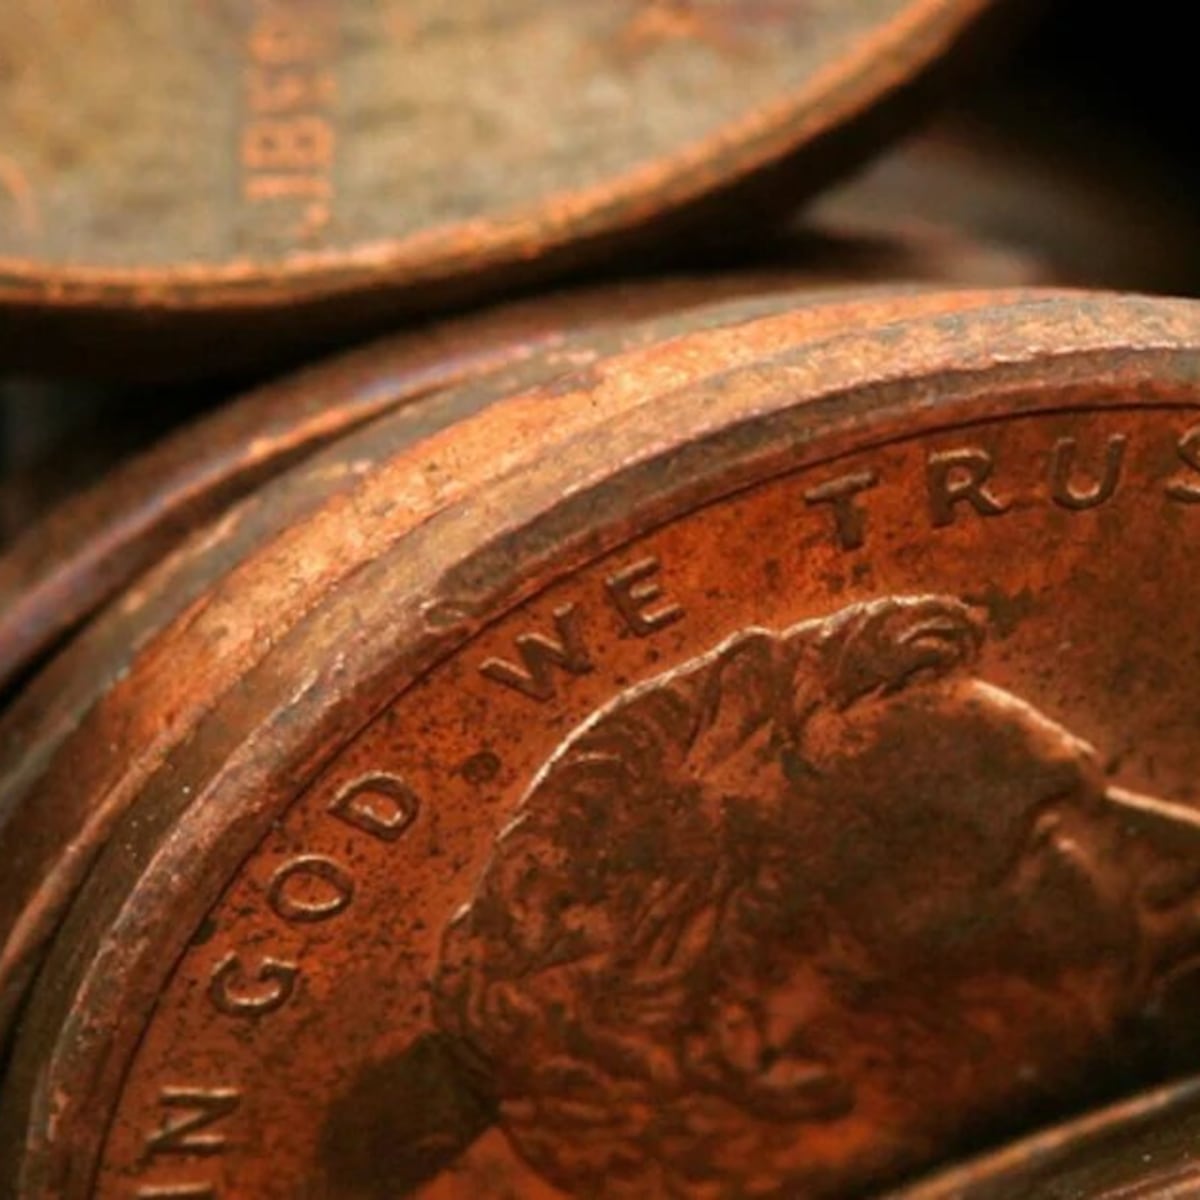 If You Have A Penny From Before 1982, It's Worth More Than 1 Cent